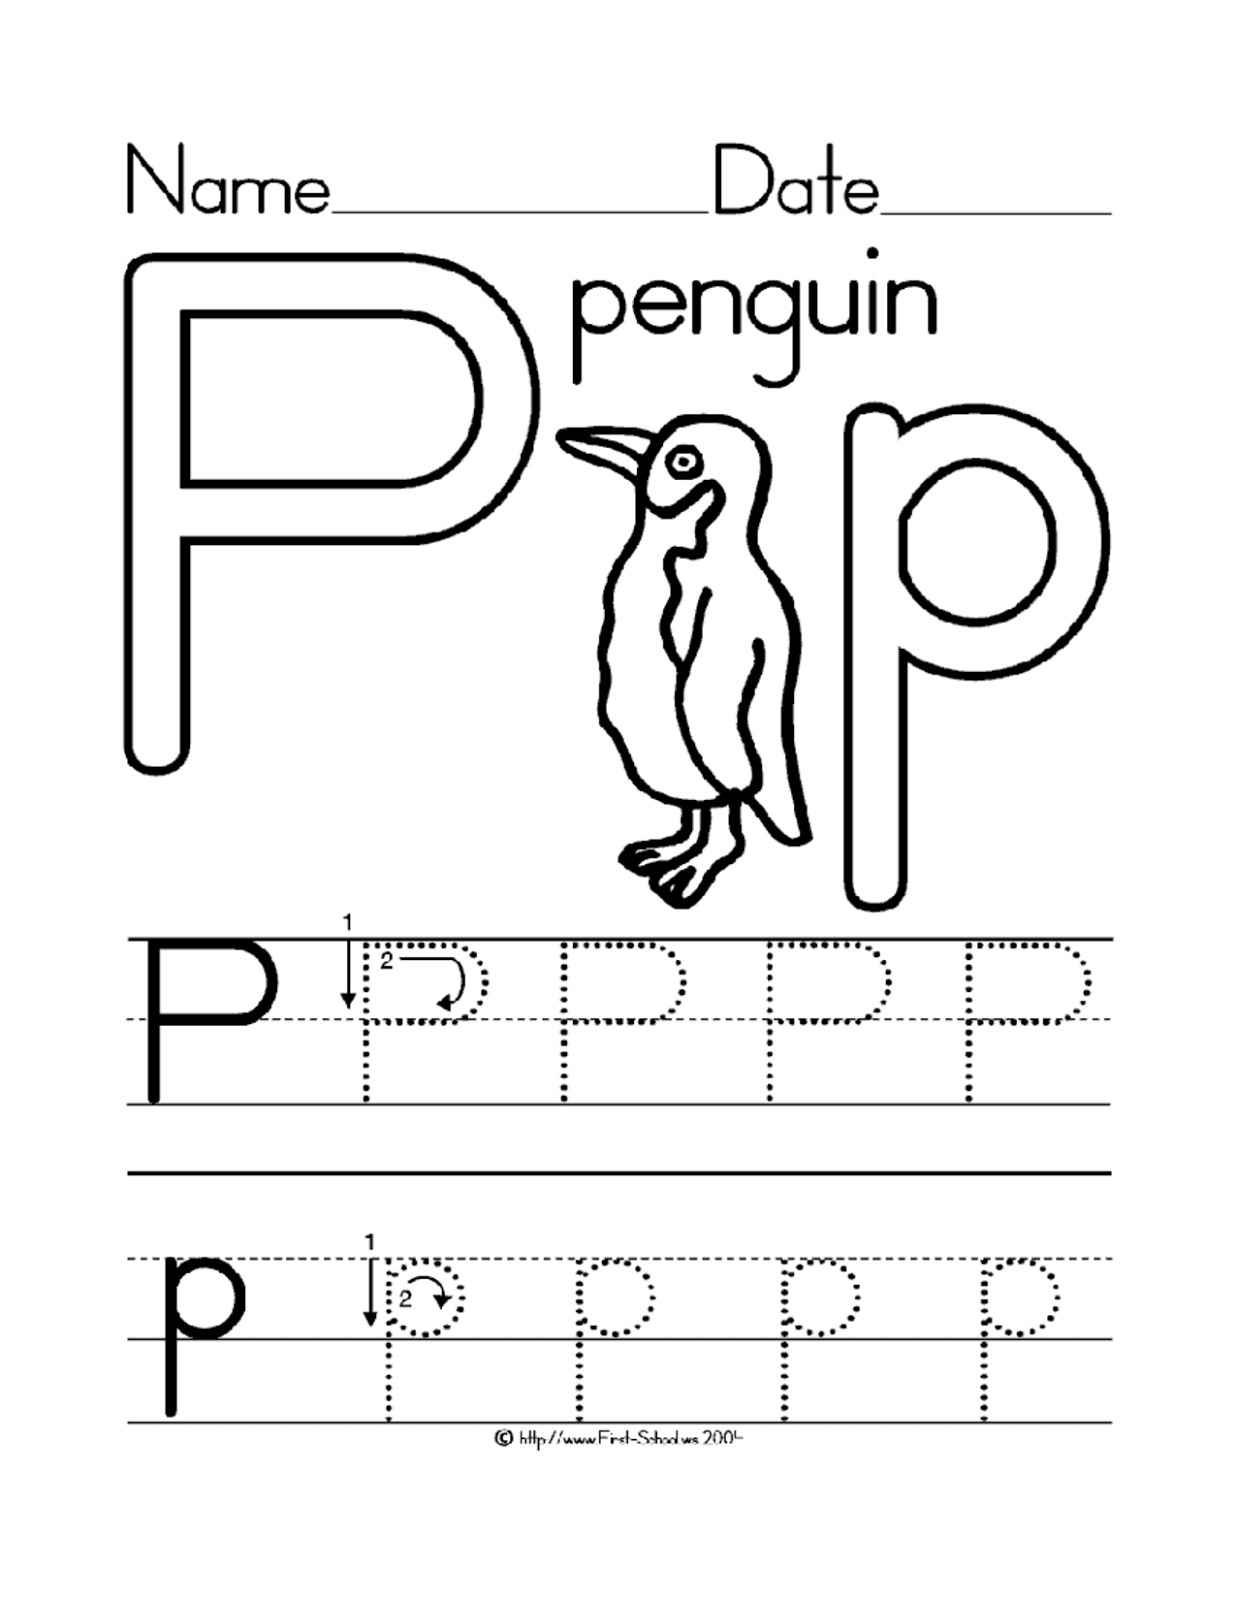 14-constructive-letter-p-worksheets-kitty-baby-love